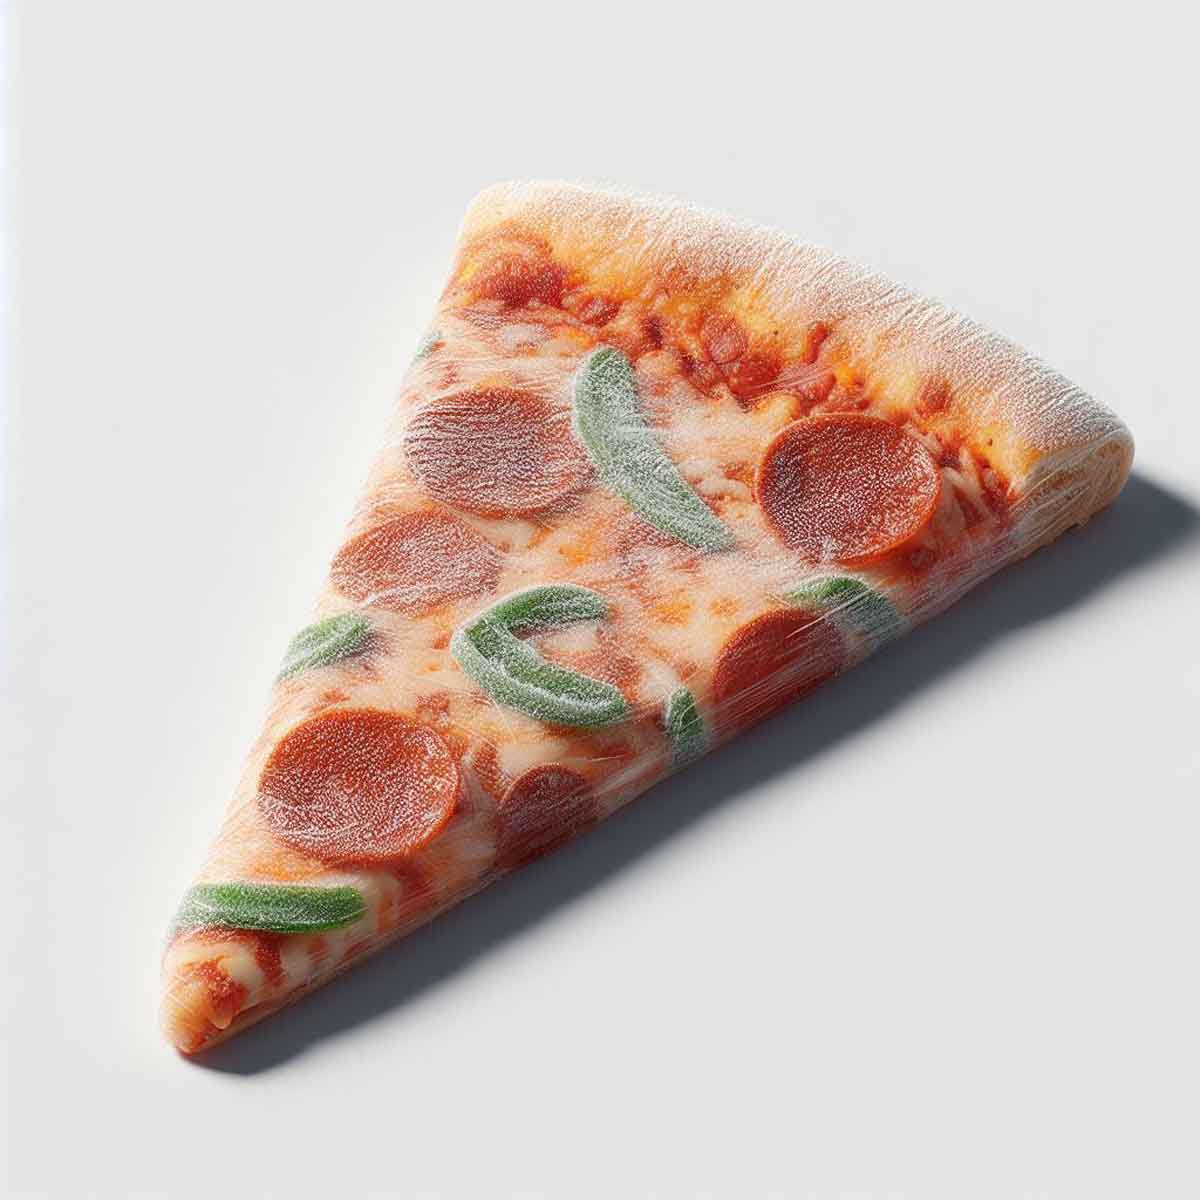 A frozen Domino's pizza slice wrapped in cling film, preserving the texture and toppings.